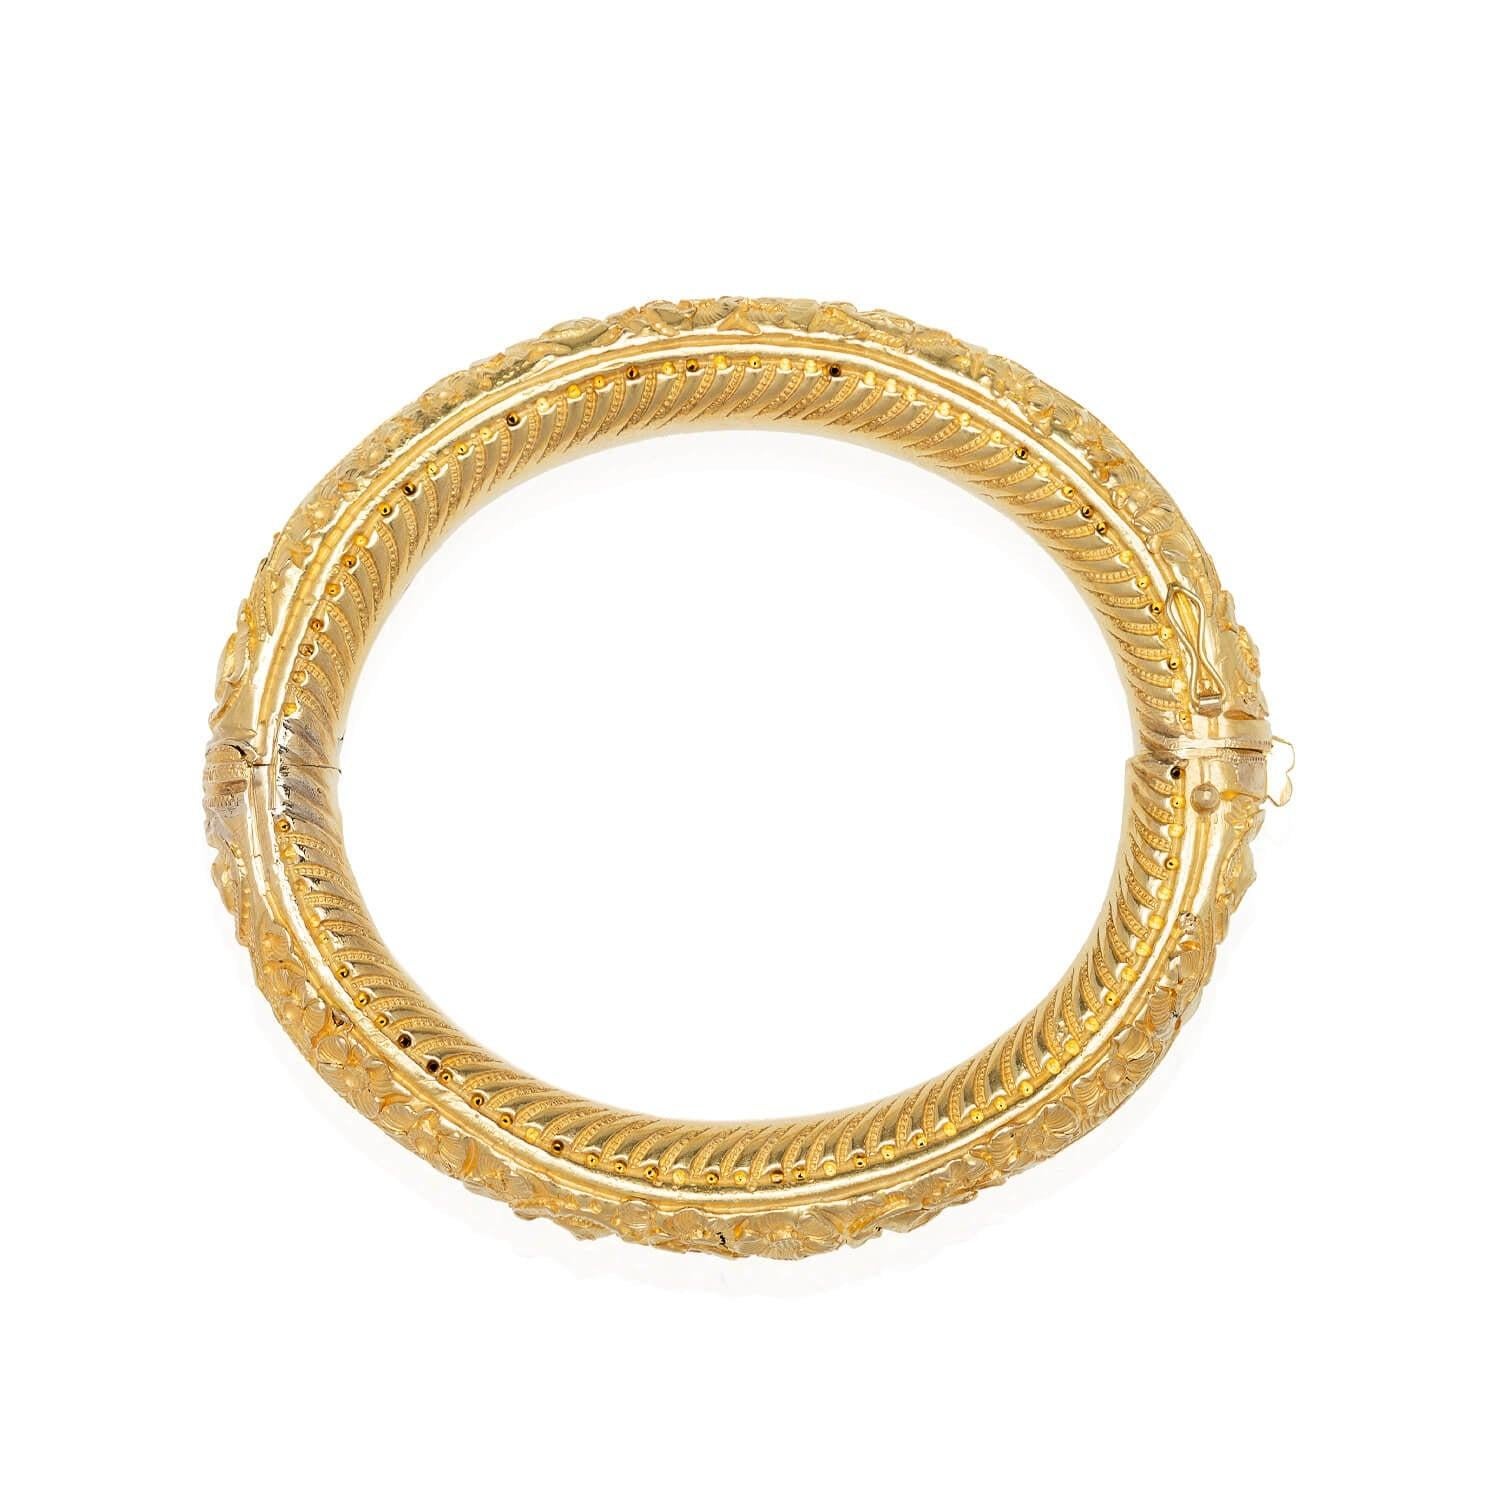 A beautiful bangle bracelet from the Art Nouveau (ca1900s) era! Crafted in vibrant 18kt yellow gold, this bangle bracelet has a gorgeous floral pattern across its surface. The rounded surface features an elegant bouquet of various flowers and an